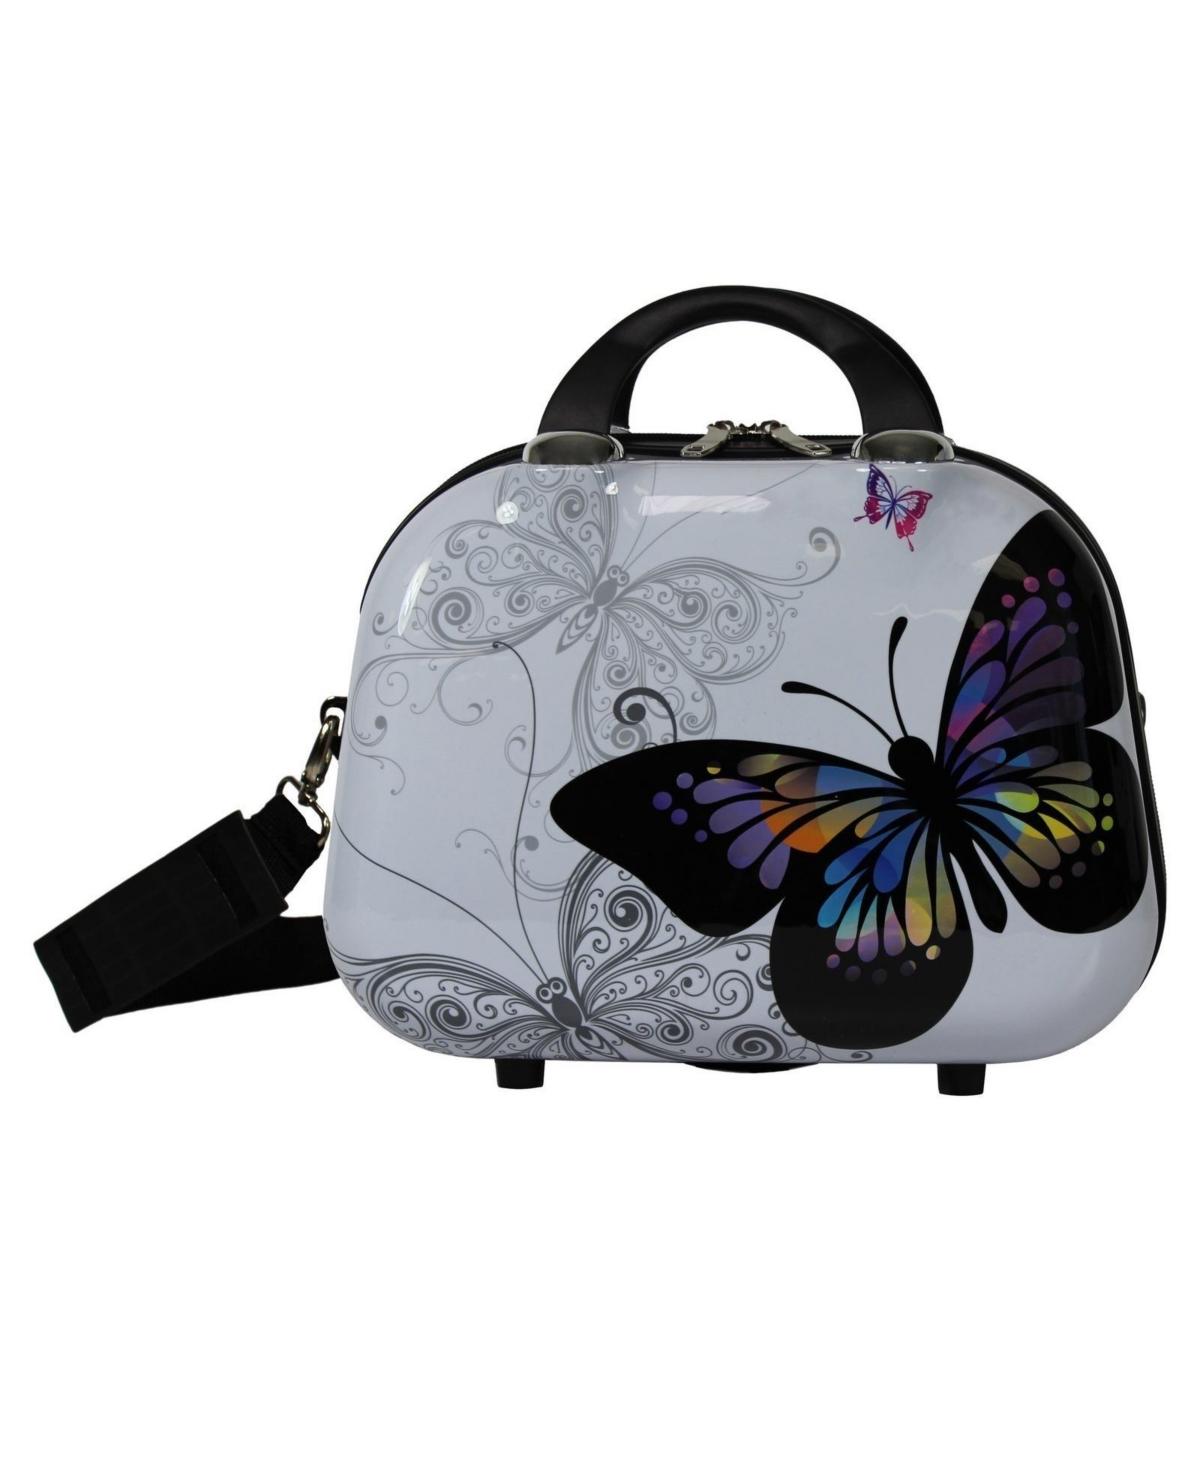 Butterfly 13-Inch Cosmetic Beauty Case Shoulder Tote - Butterfly